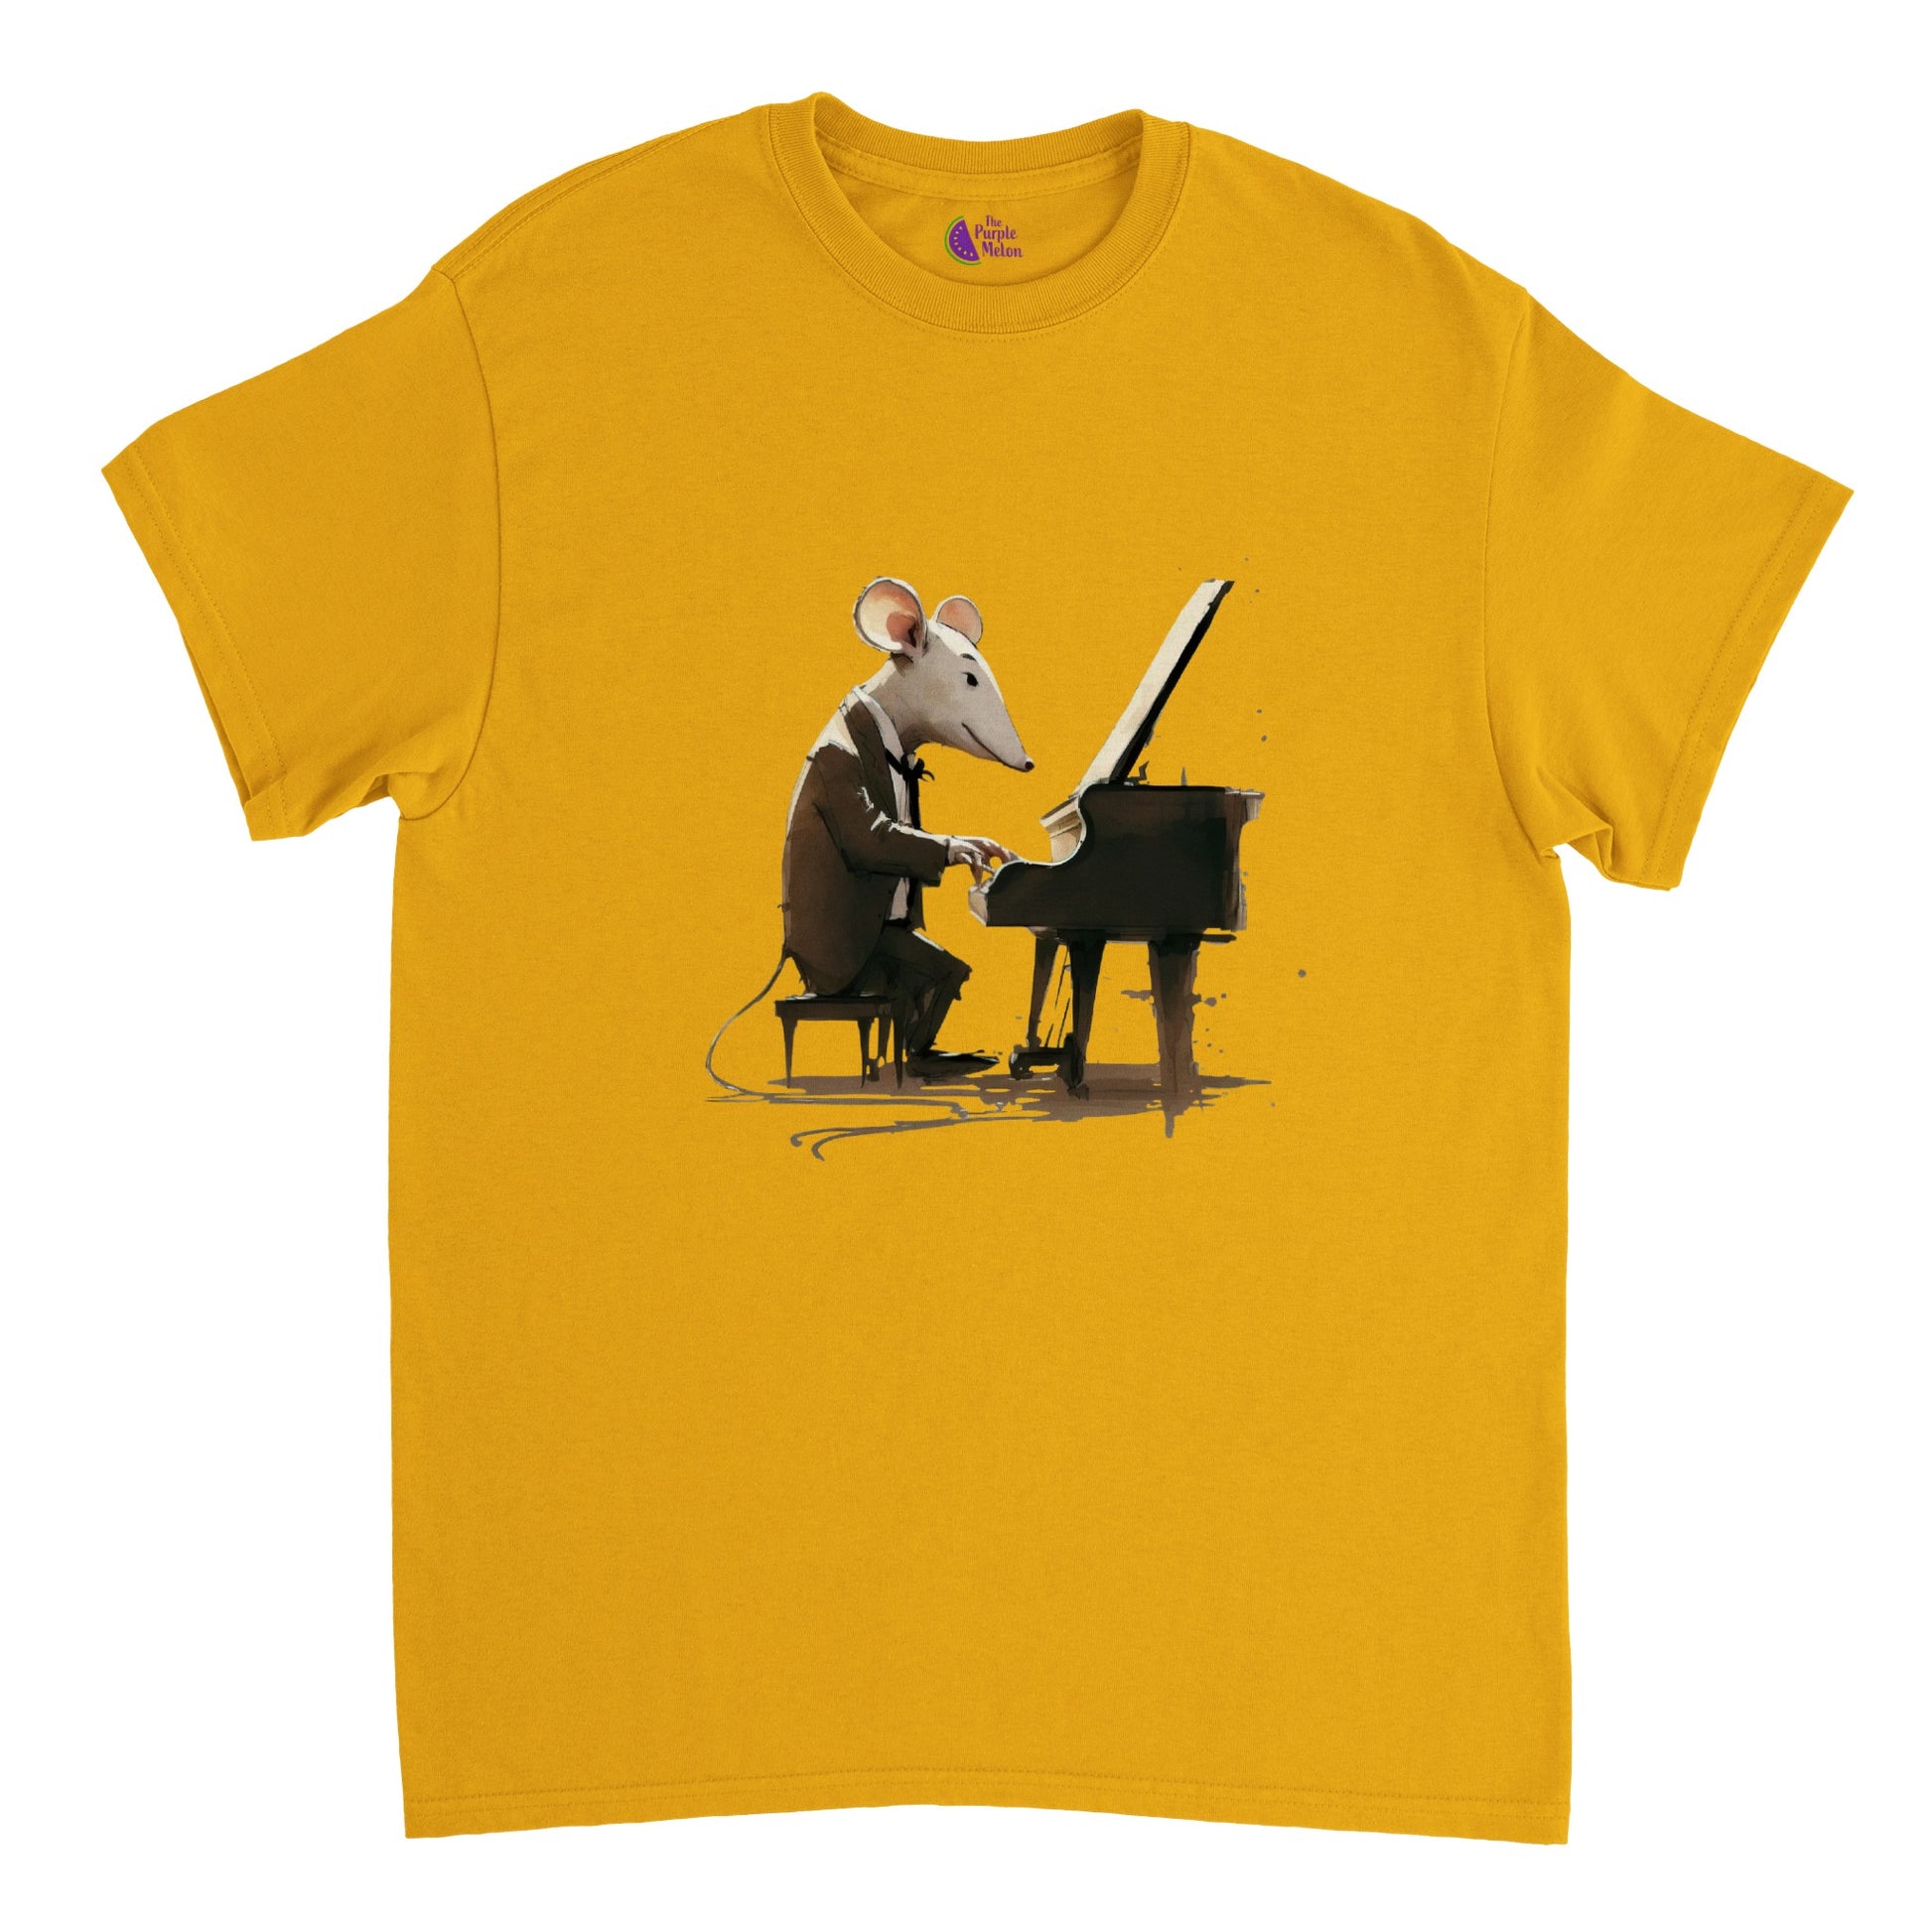 Gold t-shirt with a mouse playing a piano print